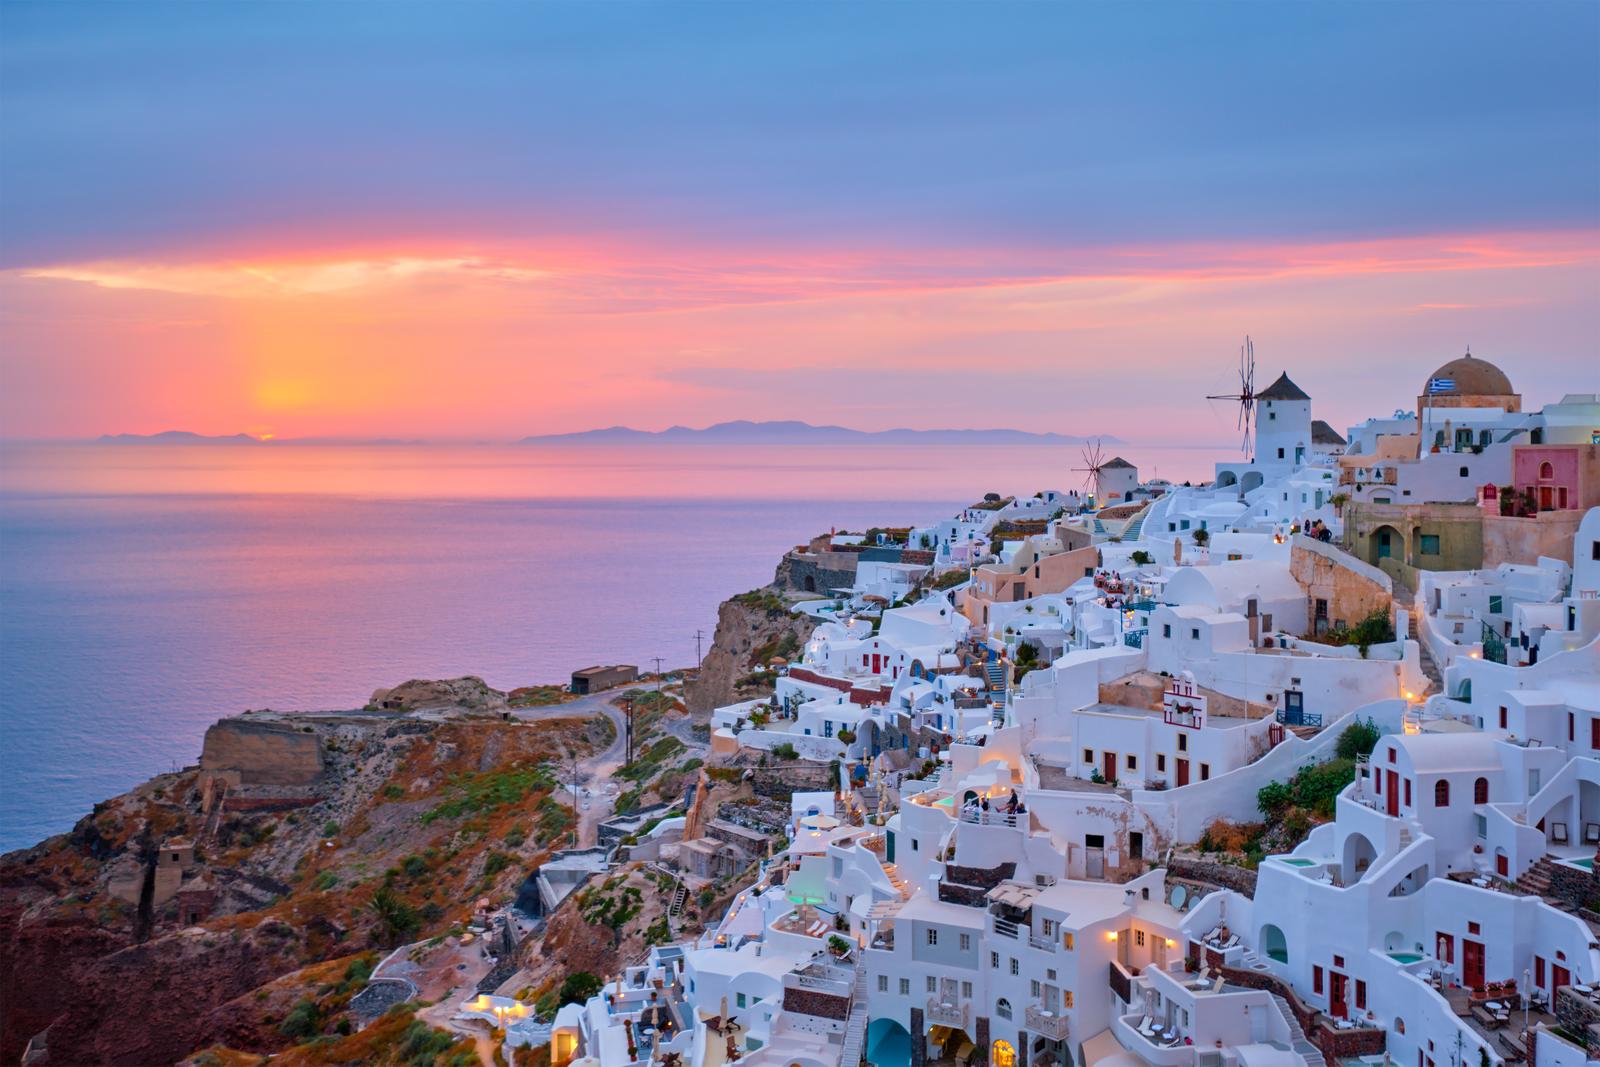 Oia village with traditional white houses and windmills in Santorini island on sunset in twilight, Greece